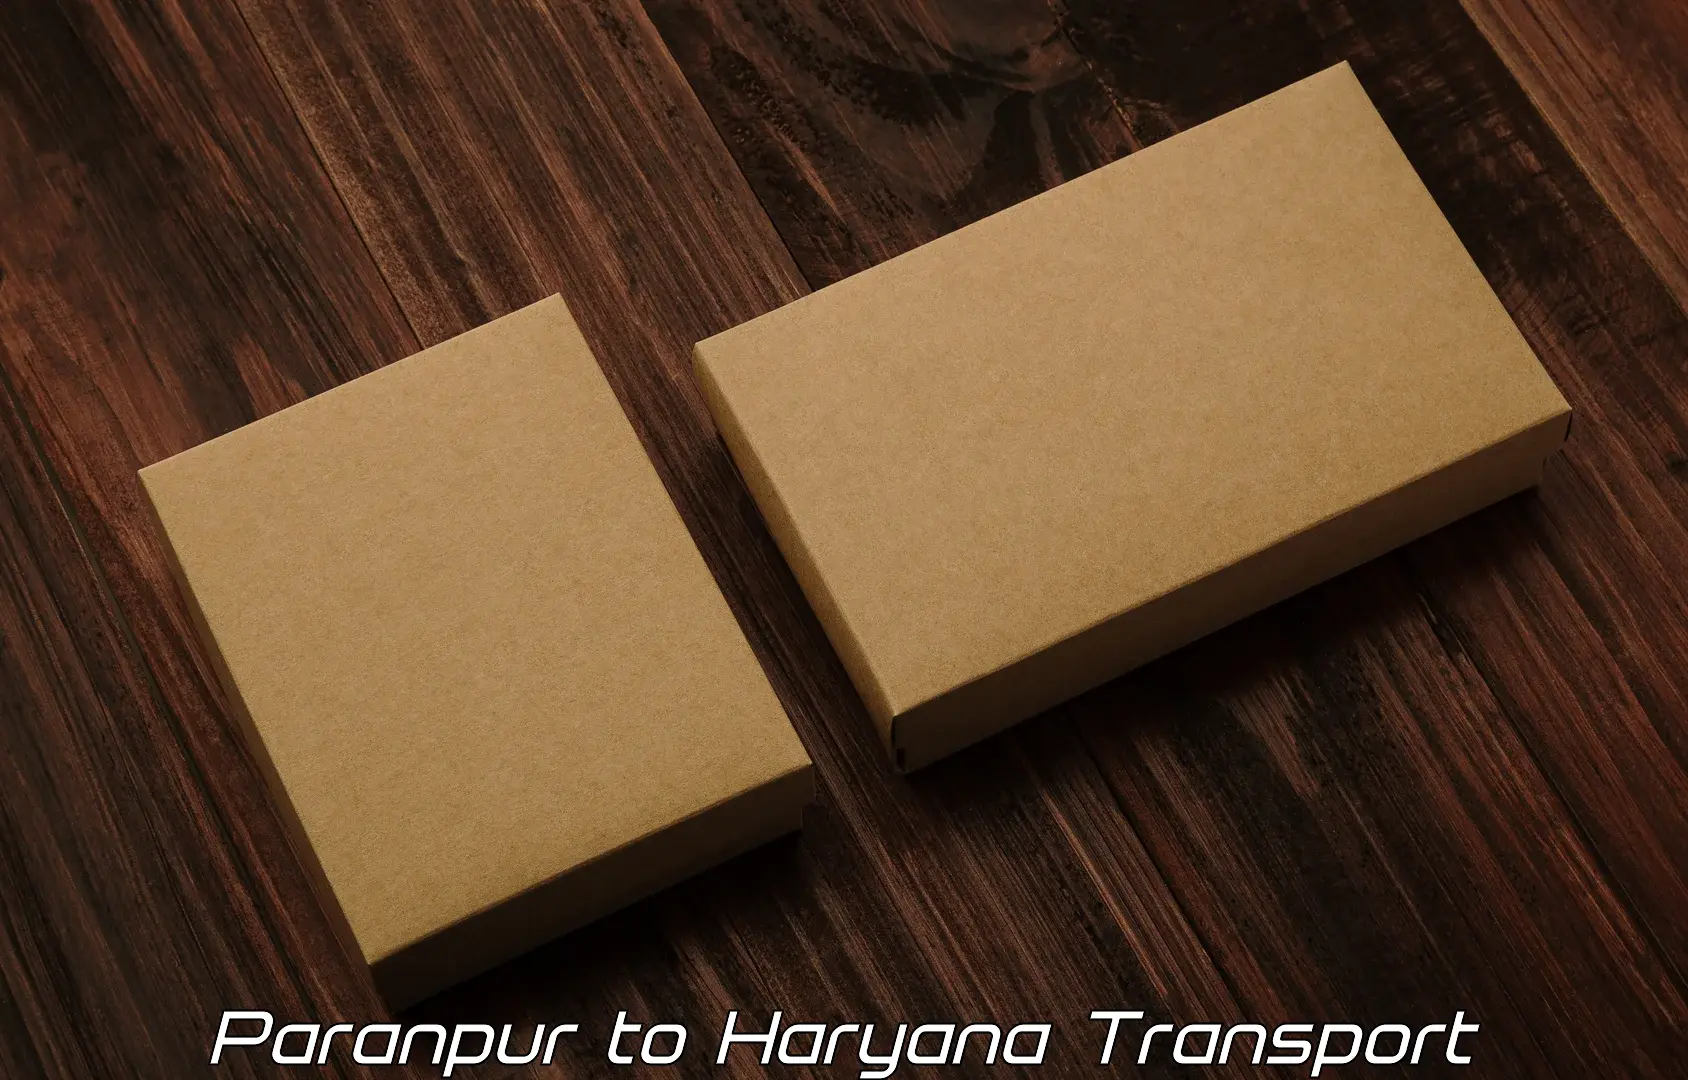 Road transport services in Paranpur to Bhiwani